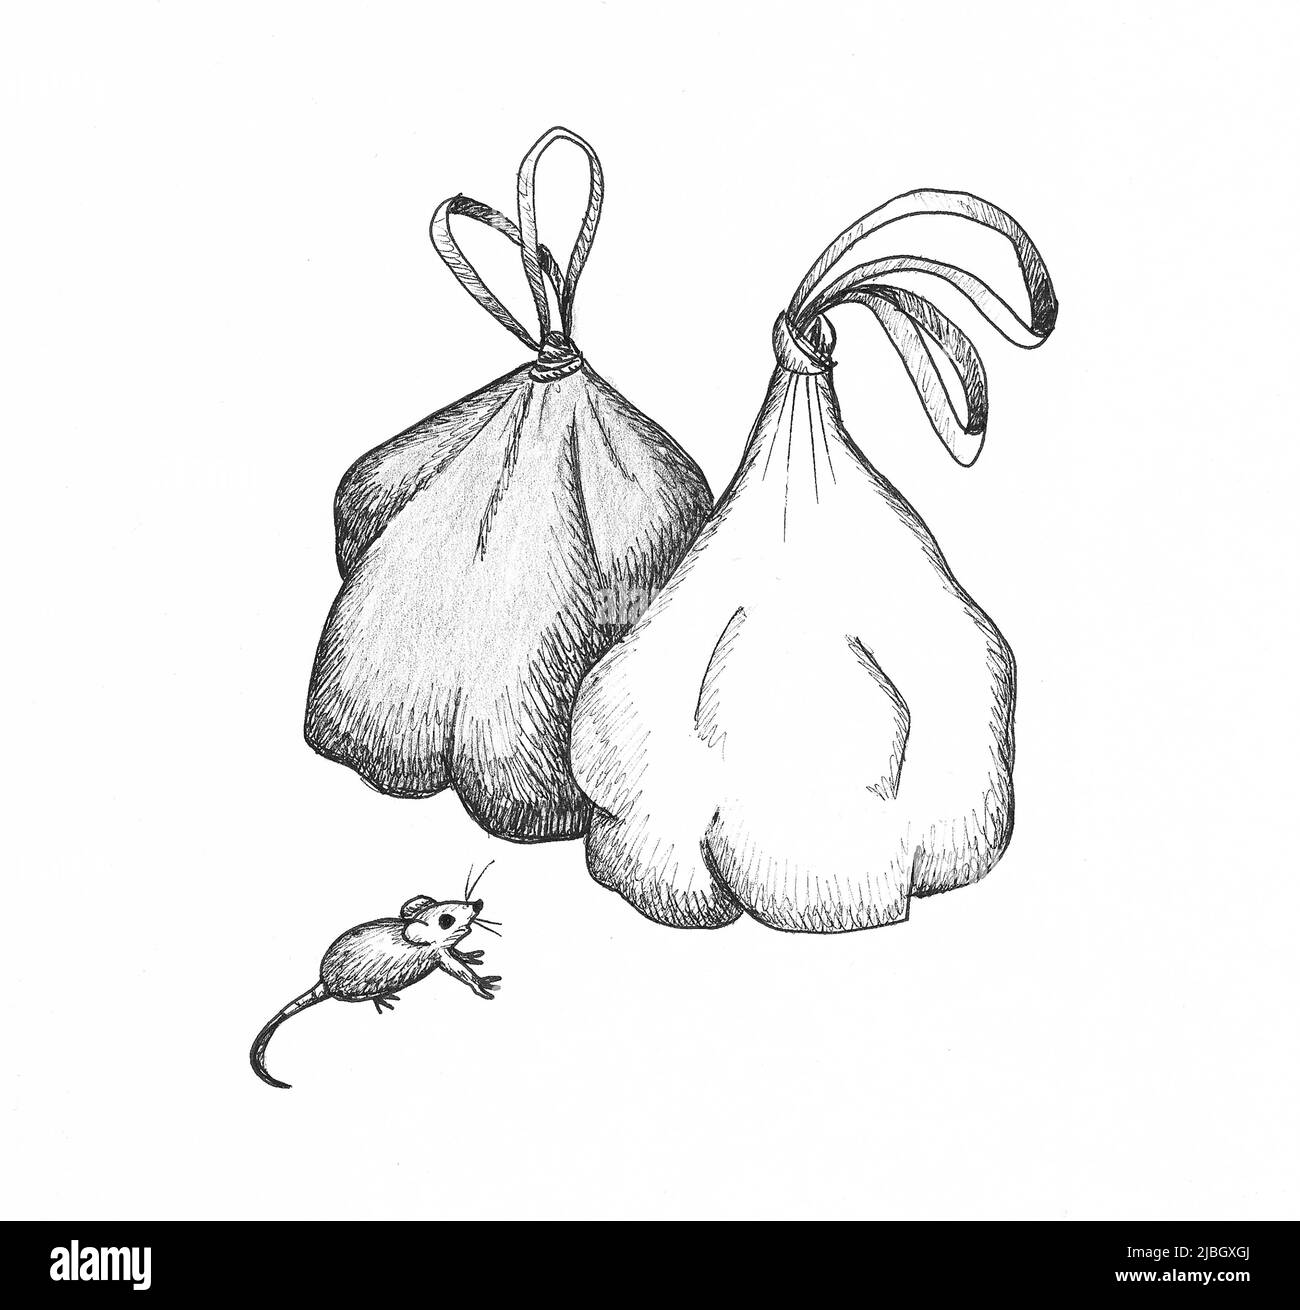 Two rubbish bags and a mouse. Illustration. Stock Photo